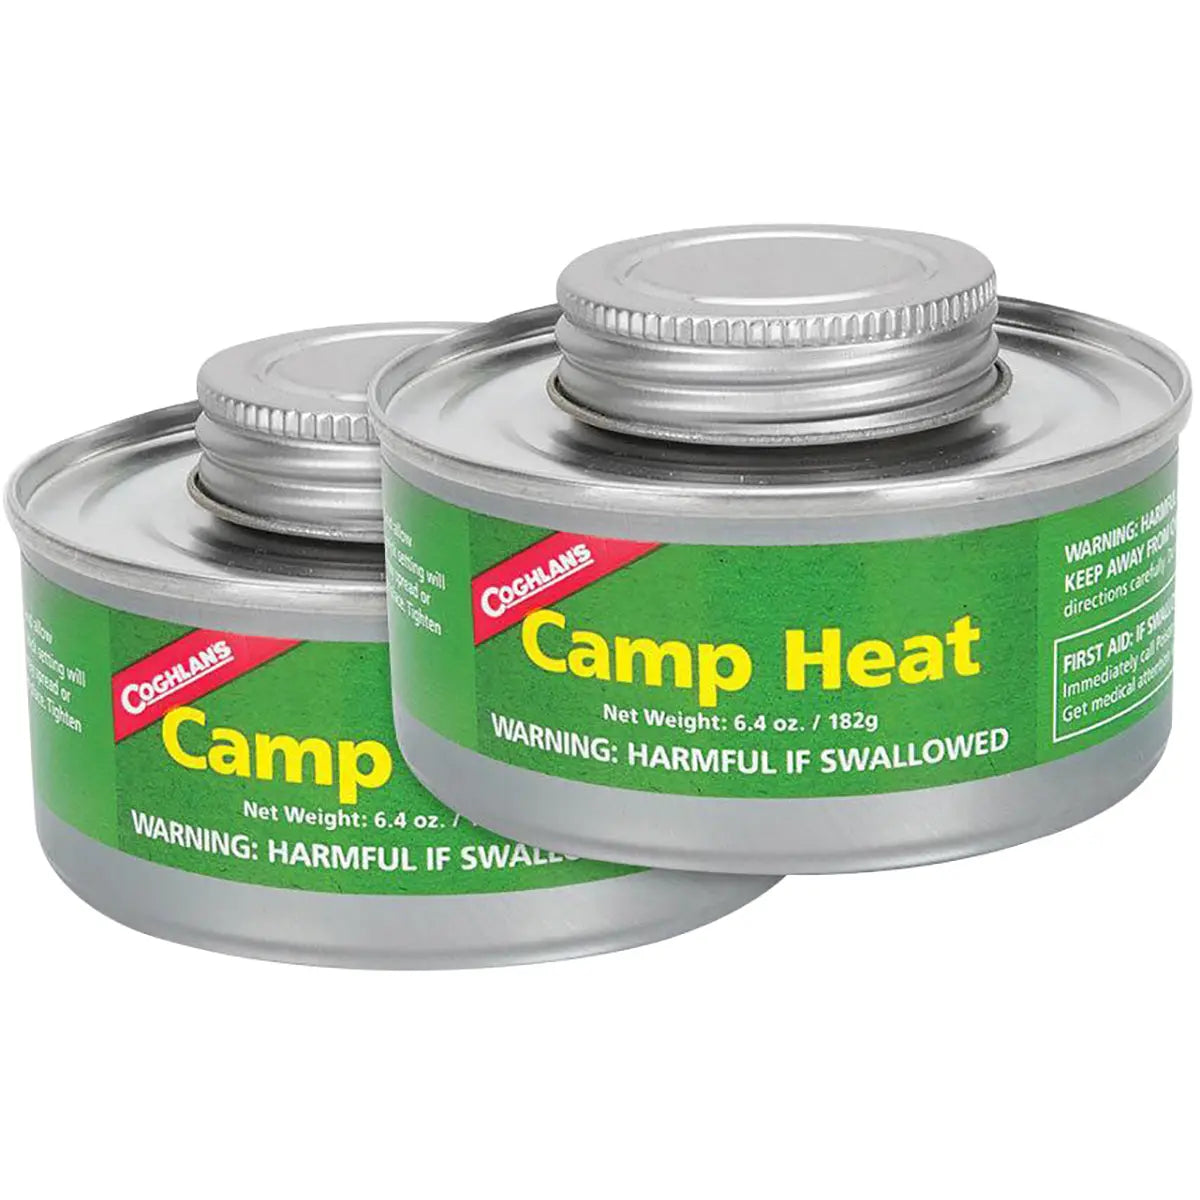 Coghlan's Camp Heat Emergency Cooking Fuel Can (2 Pack), Recloseable 4-6 hr Burn Coghlan's